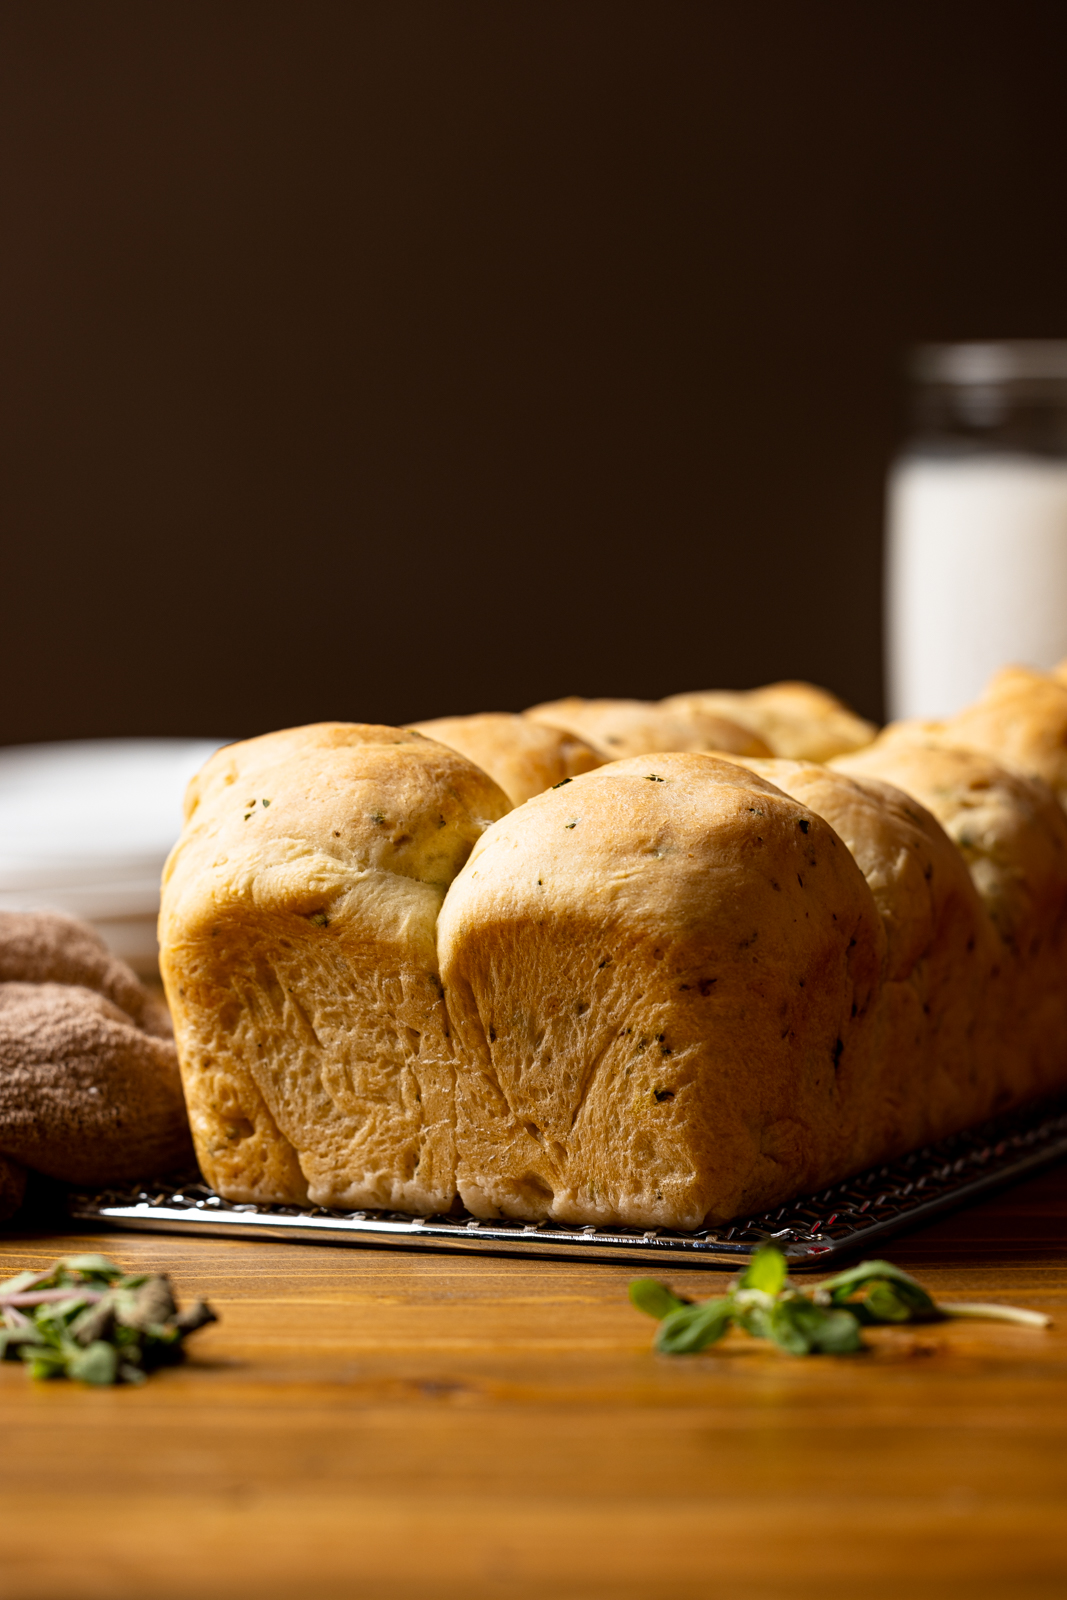 Front view of baked bread on a silver tray on a brown wood table with a brown napkin and jar of milk in the background.